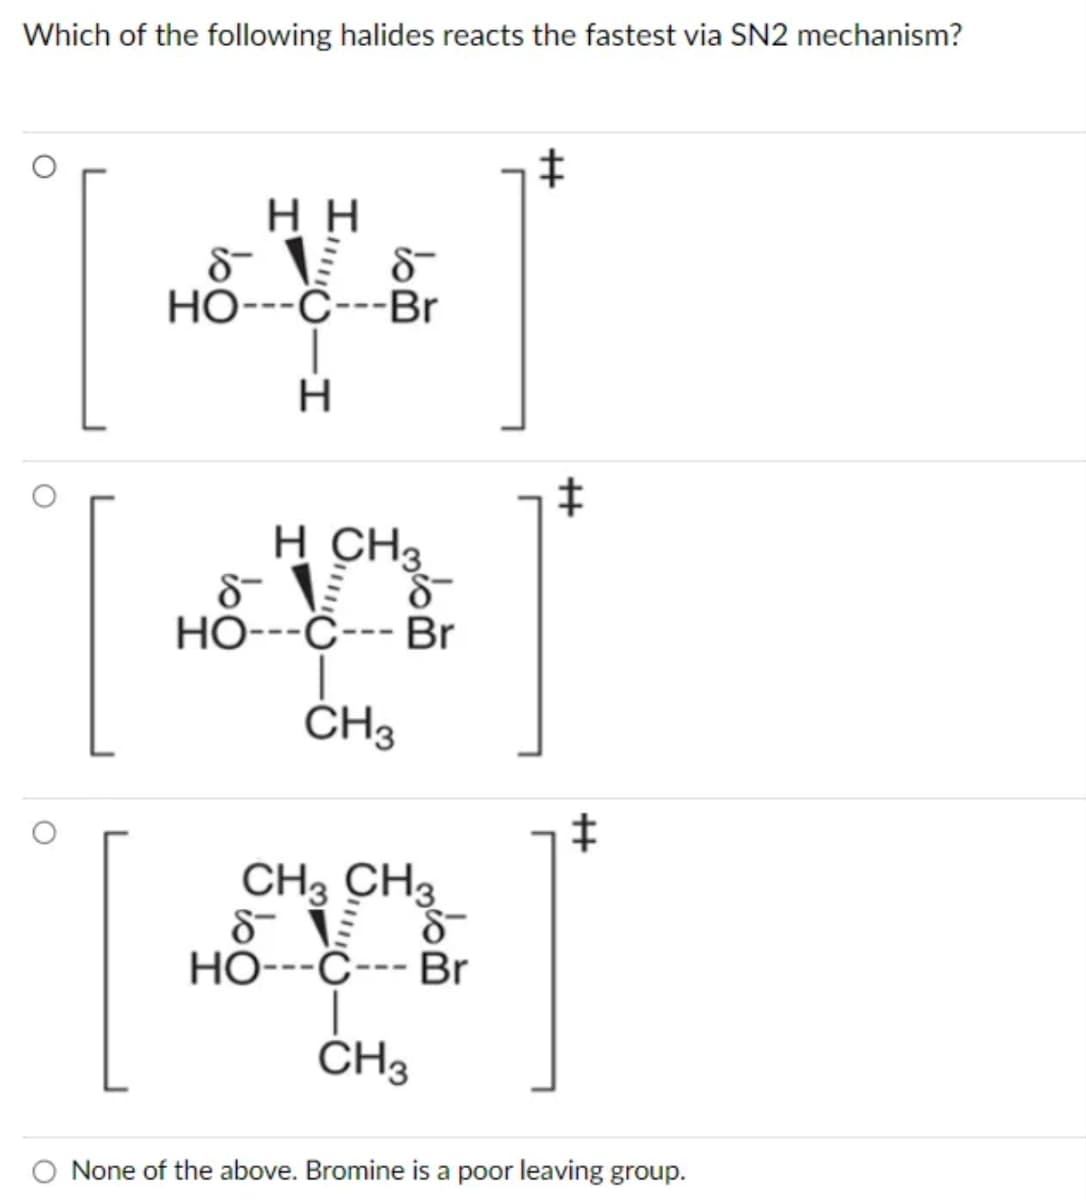 Which of the following halides reacts the fastest via SN2 mechanism?
HH
8-1
HO---C---Br
-I
8-
H
‡
+
H CH3
8-15 8-
HO---C--- Br
CH3
4]
*]
CH3 CH3
88
8T 19
HO---C--- Br
CH3
O None of the above. Bromine is a poor leaving group.